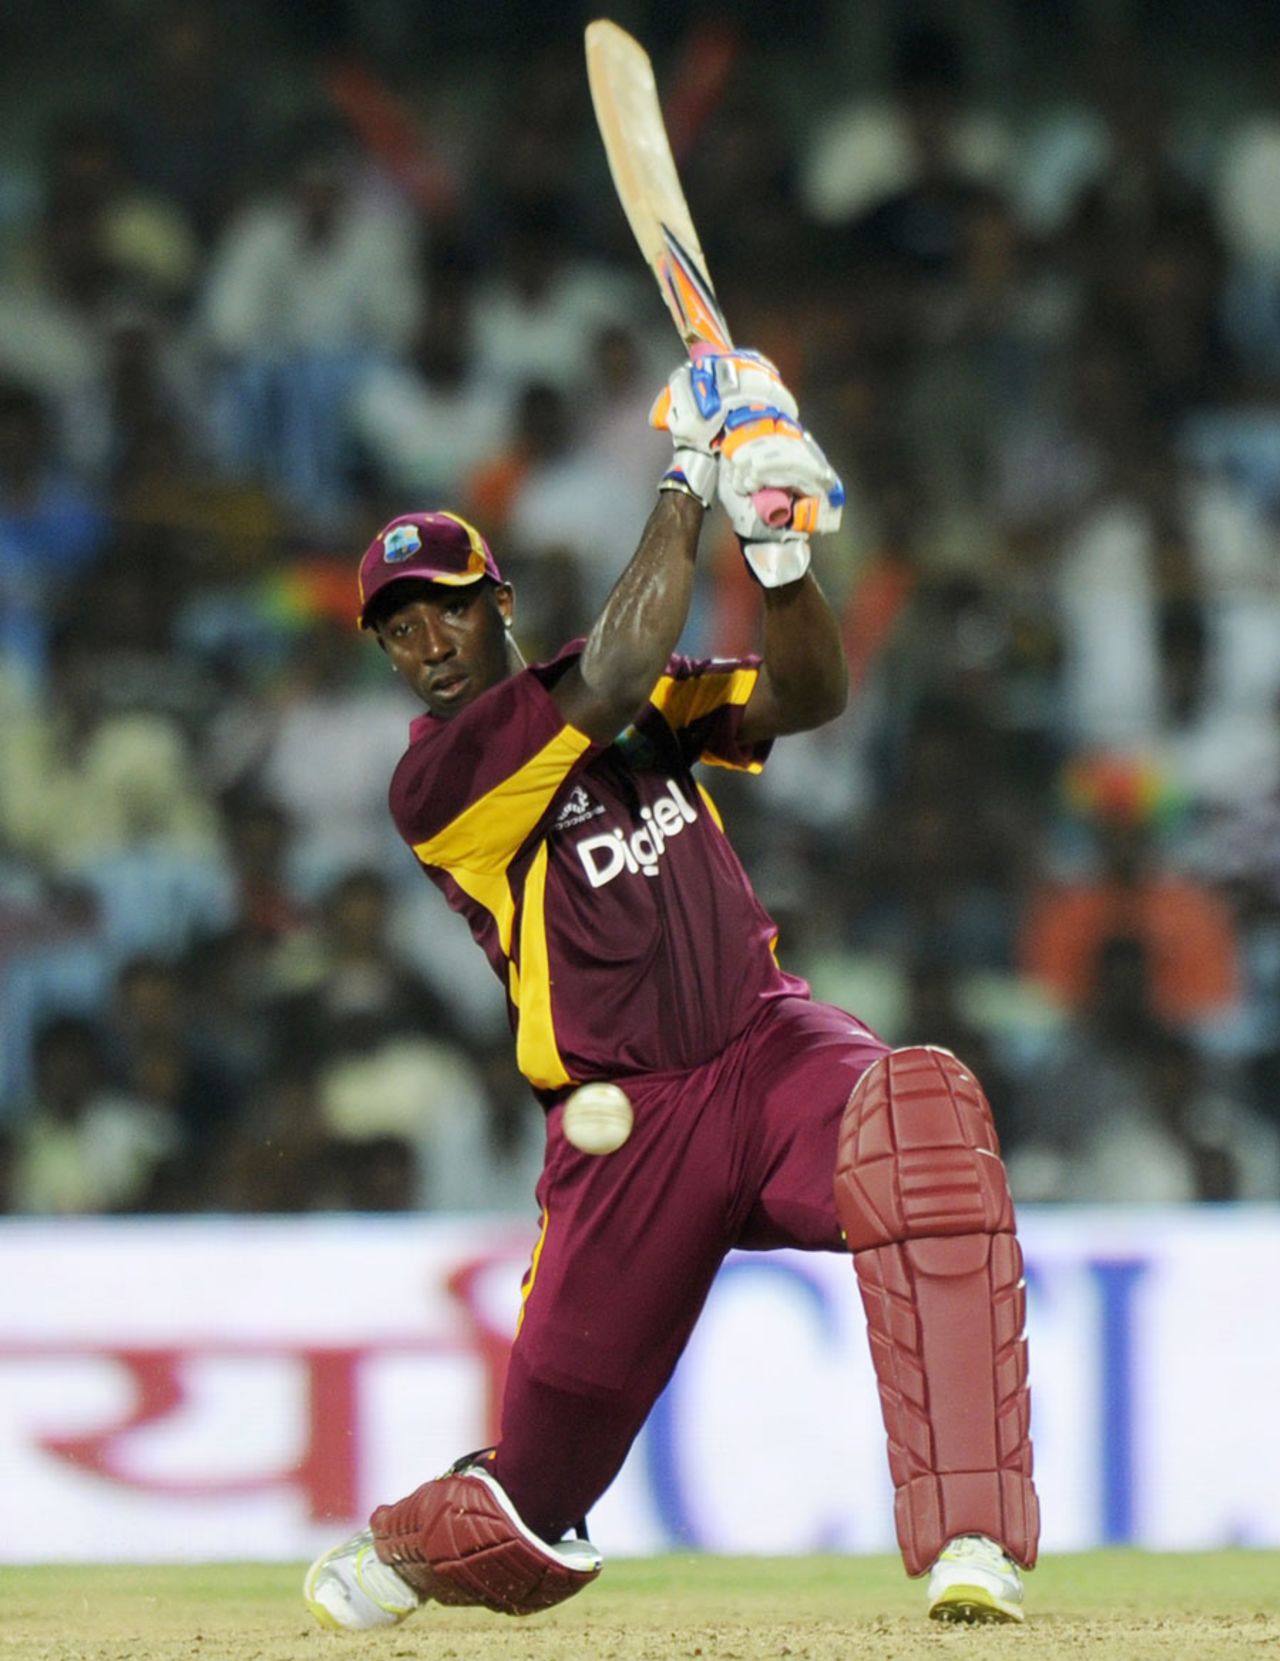 Andre Russell slams one through the off side, India v West Indies, 5th ODI, Chennai, December 11, 2011